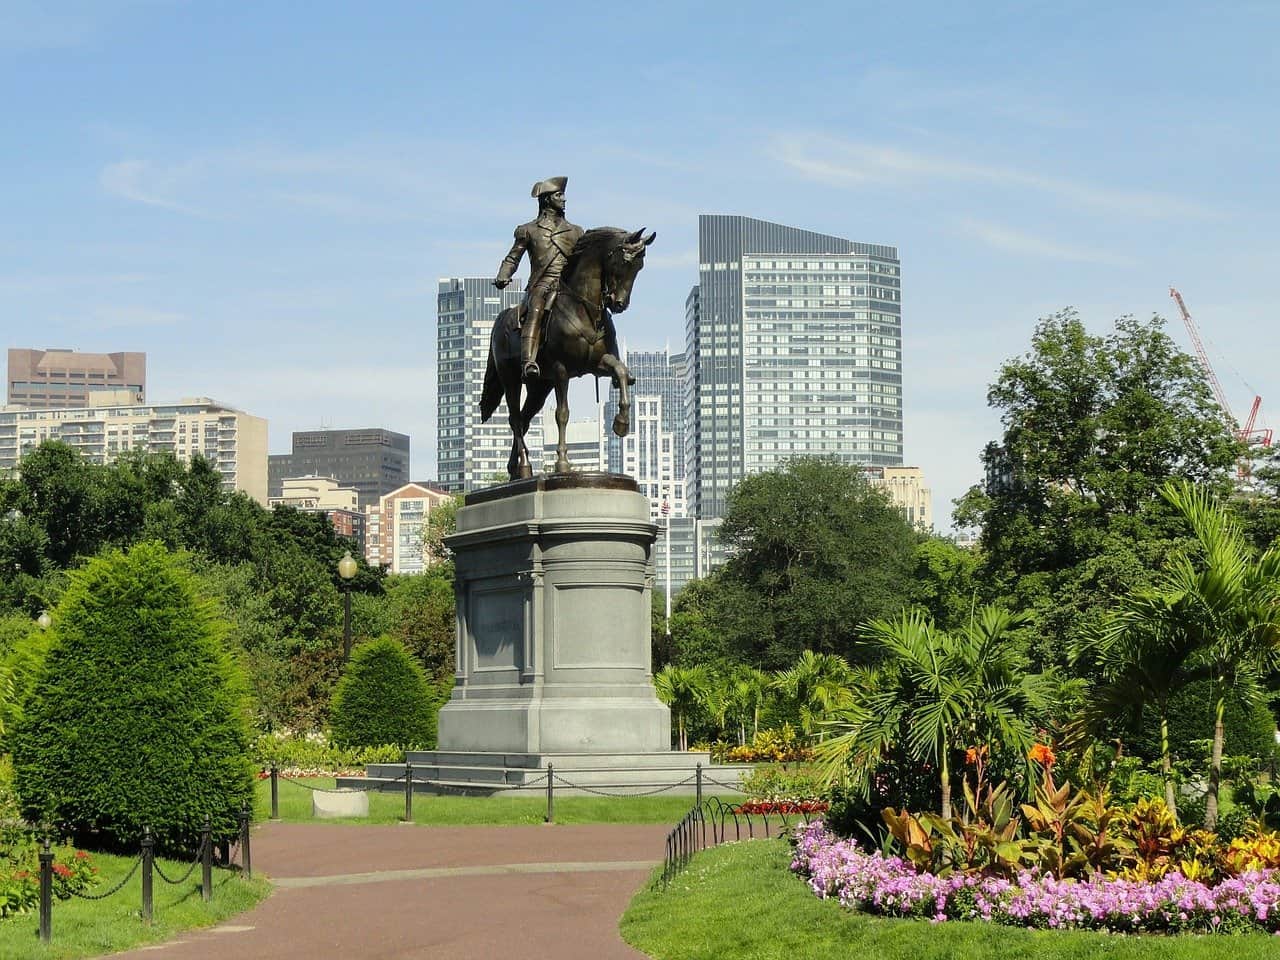 Paul Revere statue in Boston Commons, with Boston buildings in the background and green trees surrounding the statue.